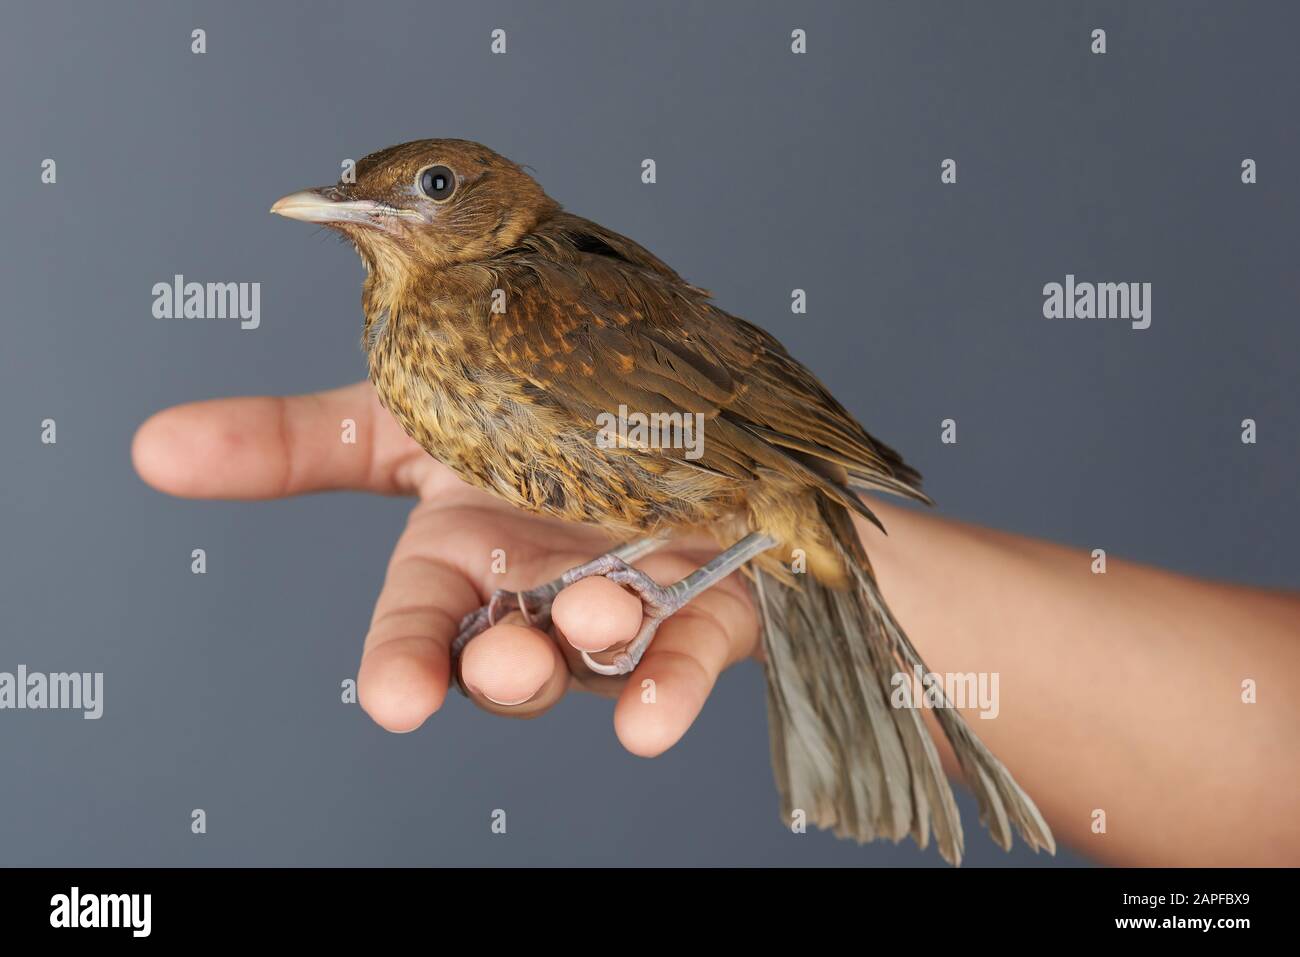 Brown bird sit on human hand close up view in studio background Stock Photo